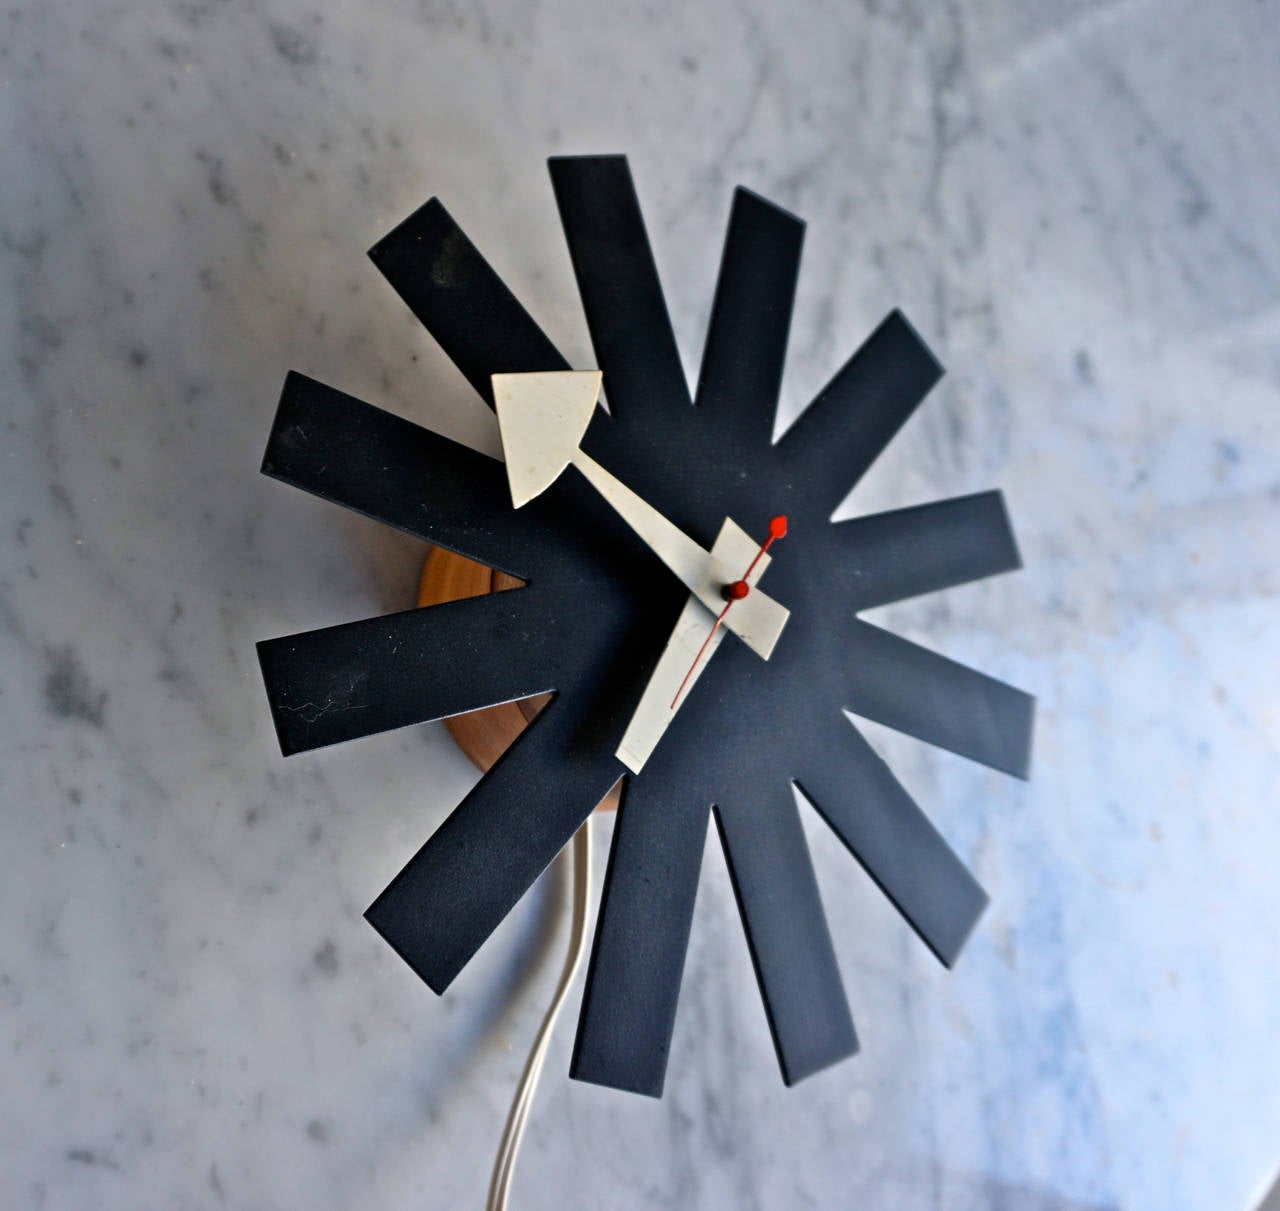 Designed by George Nelson and Associates for the Howard Miller Clock Co.
Part of a collection of vintage Nelson clocks Studio One 11 will be offering on 1stdibs.